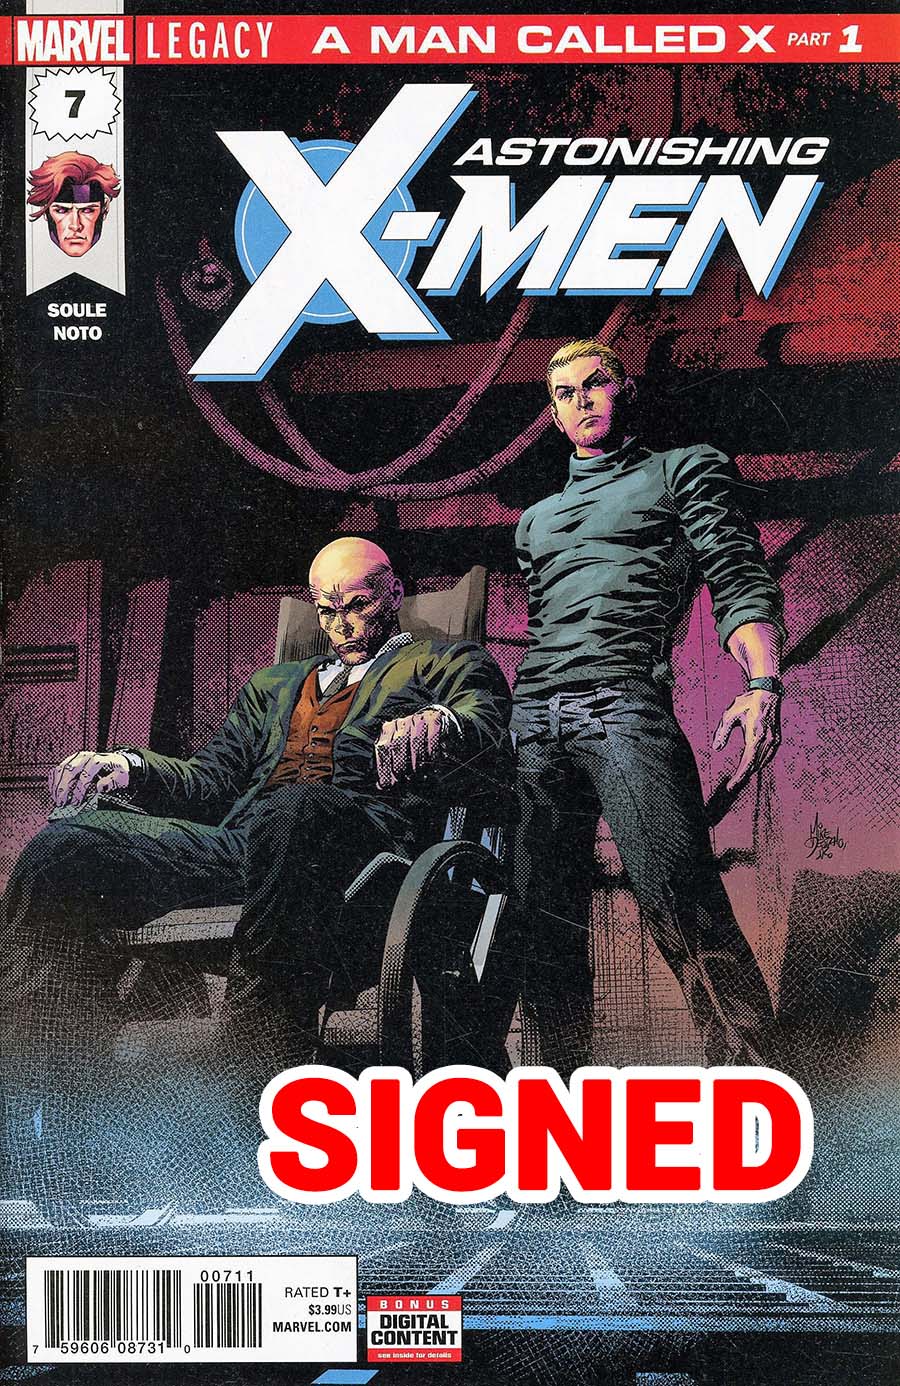 Astonishing X-Men Vol 4 #7 Cover H Regular Phil Noto Cover Signed By Charles Soule (Marvel Legacy Tie-In)